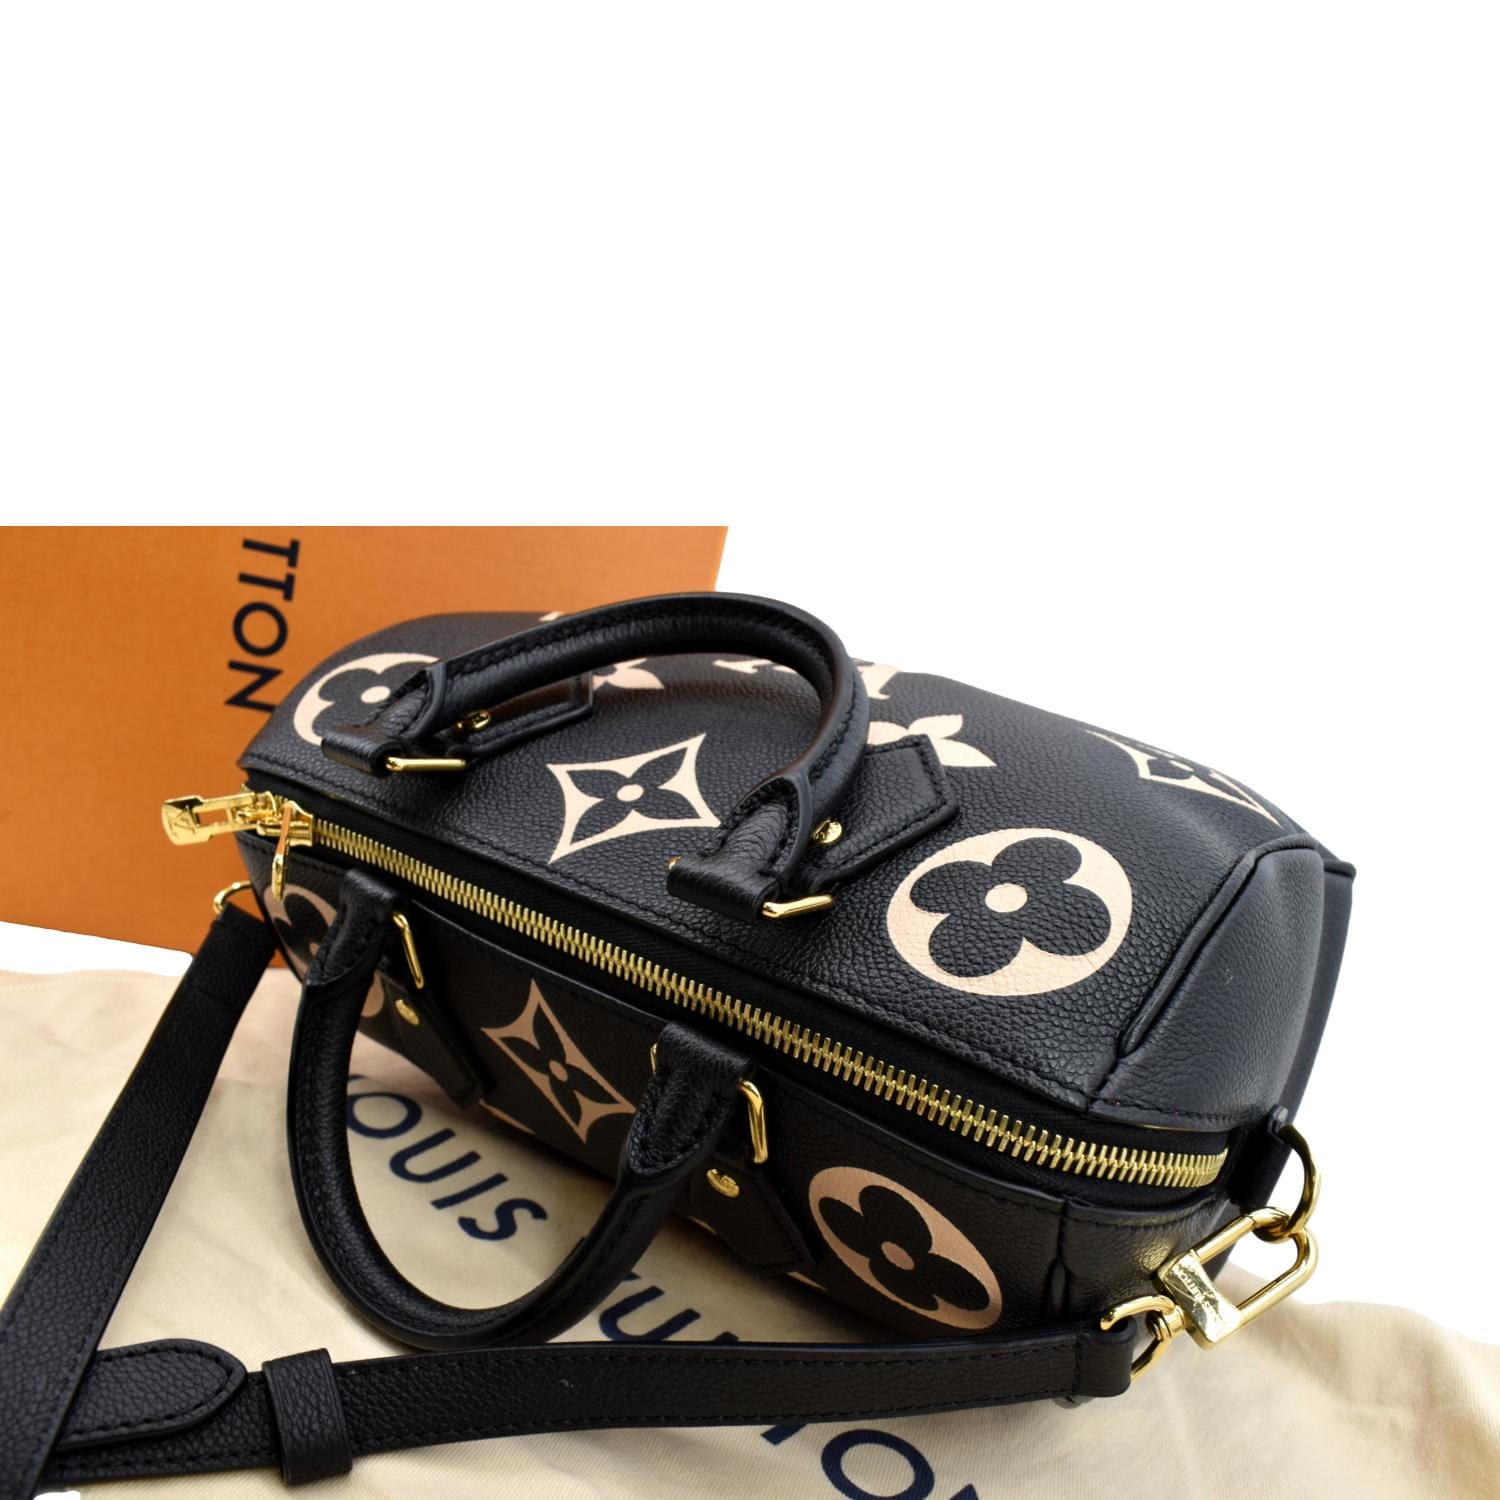 Louis Vuitton Speedy 25 Crossbody bag for Sale in Online Auctions